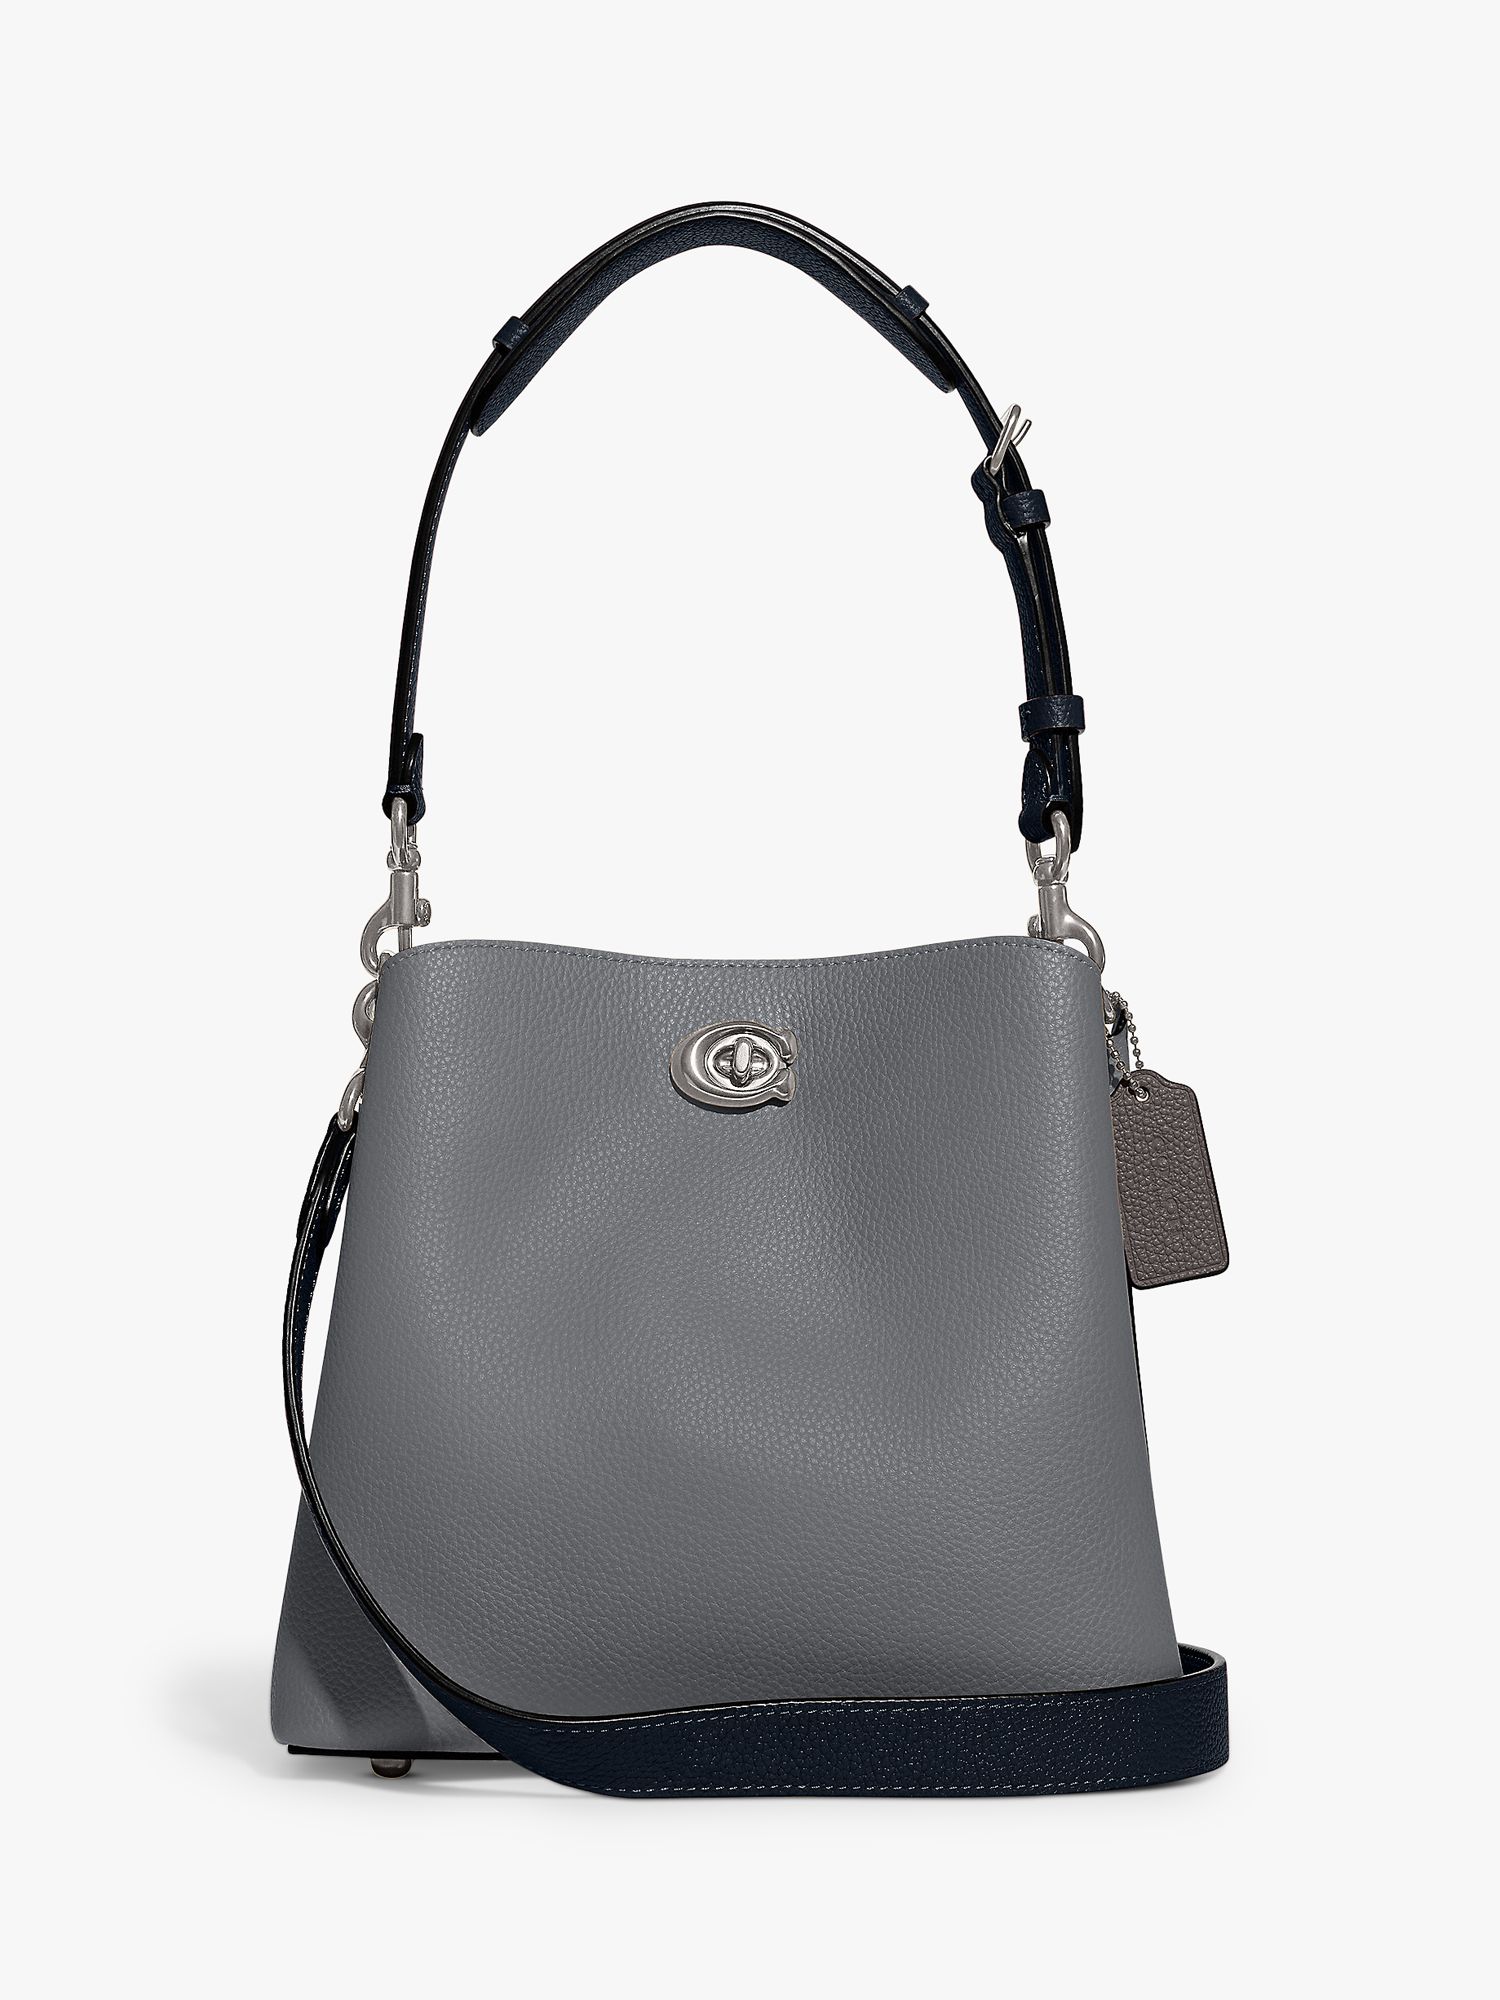 Coach Willow Leather Bucket Shoulder Bag, Grey Blue